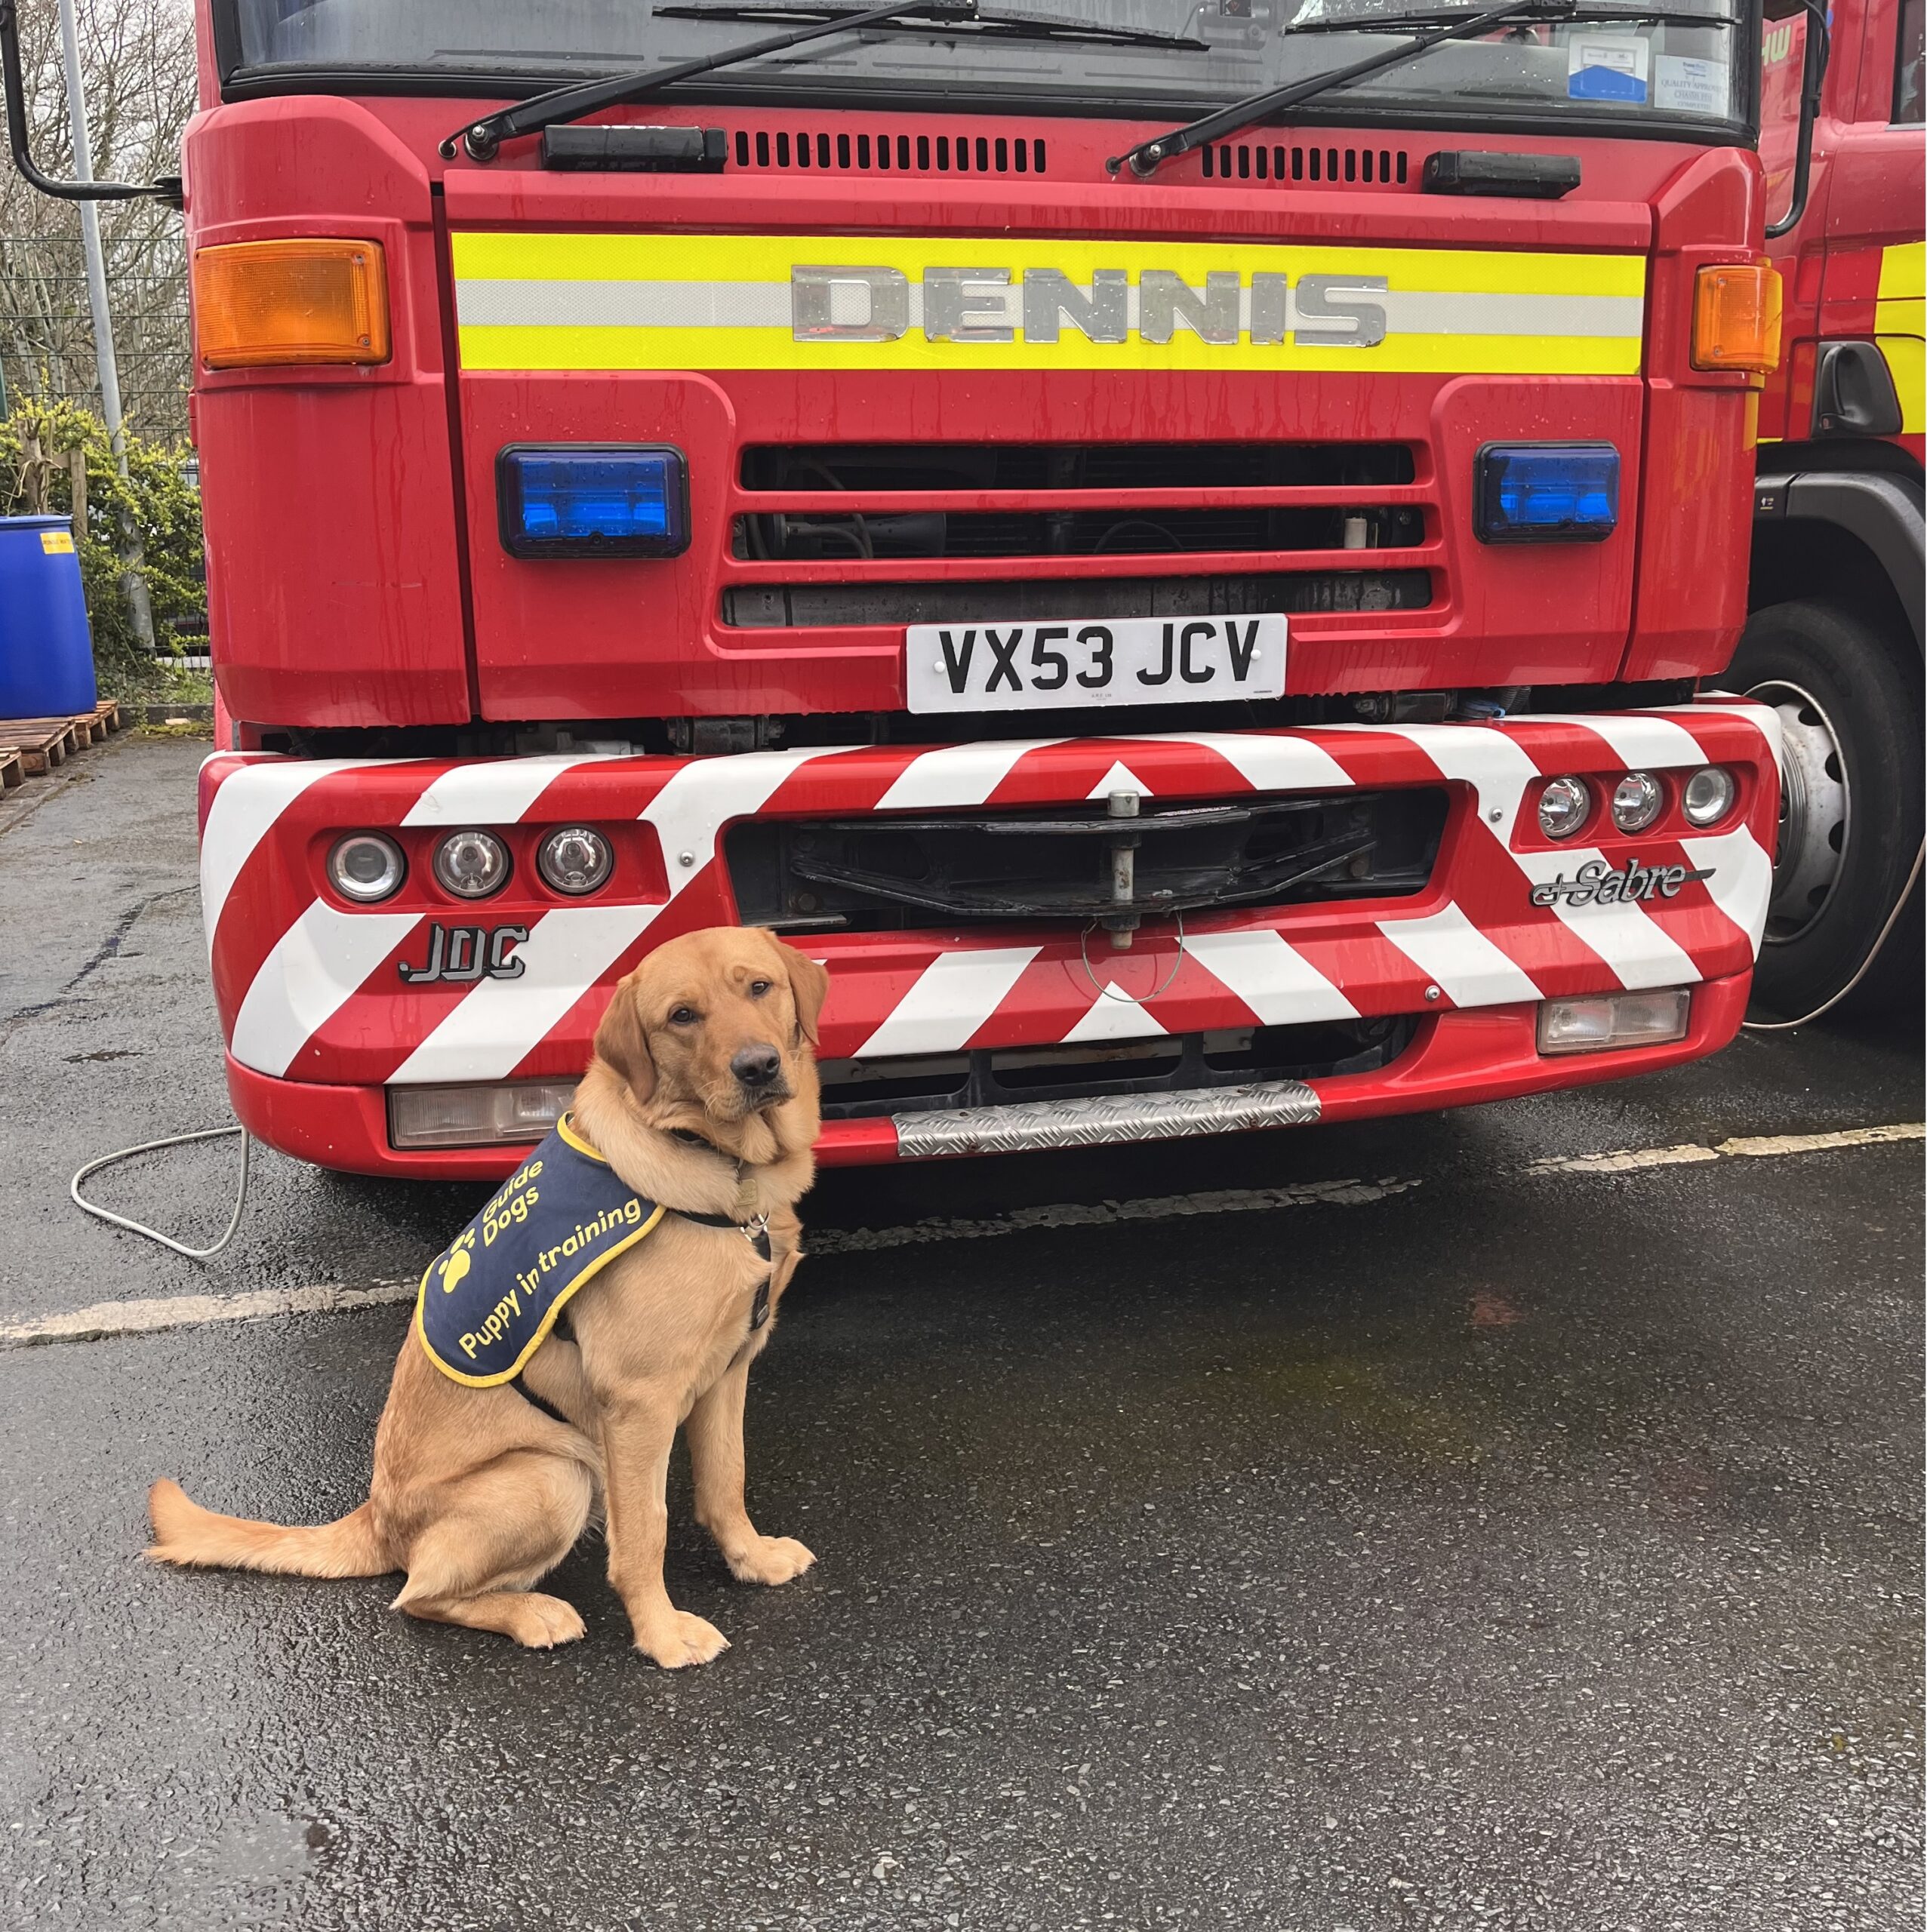 Dennis the Guide Dog puppy with a Dennis fire engine.